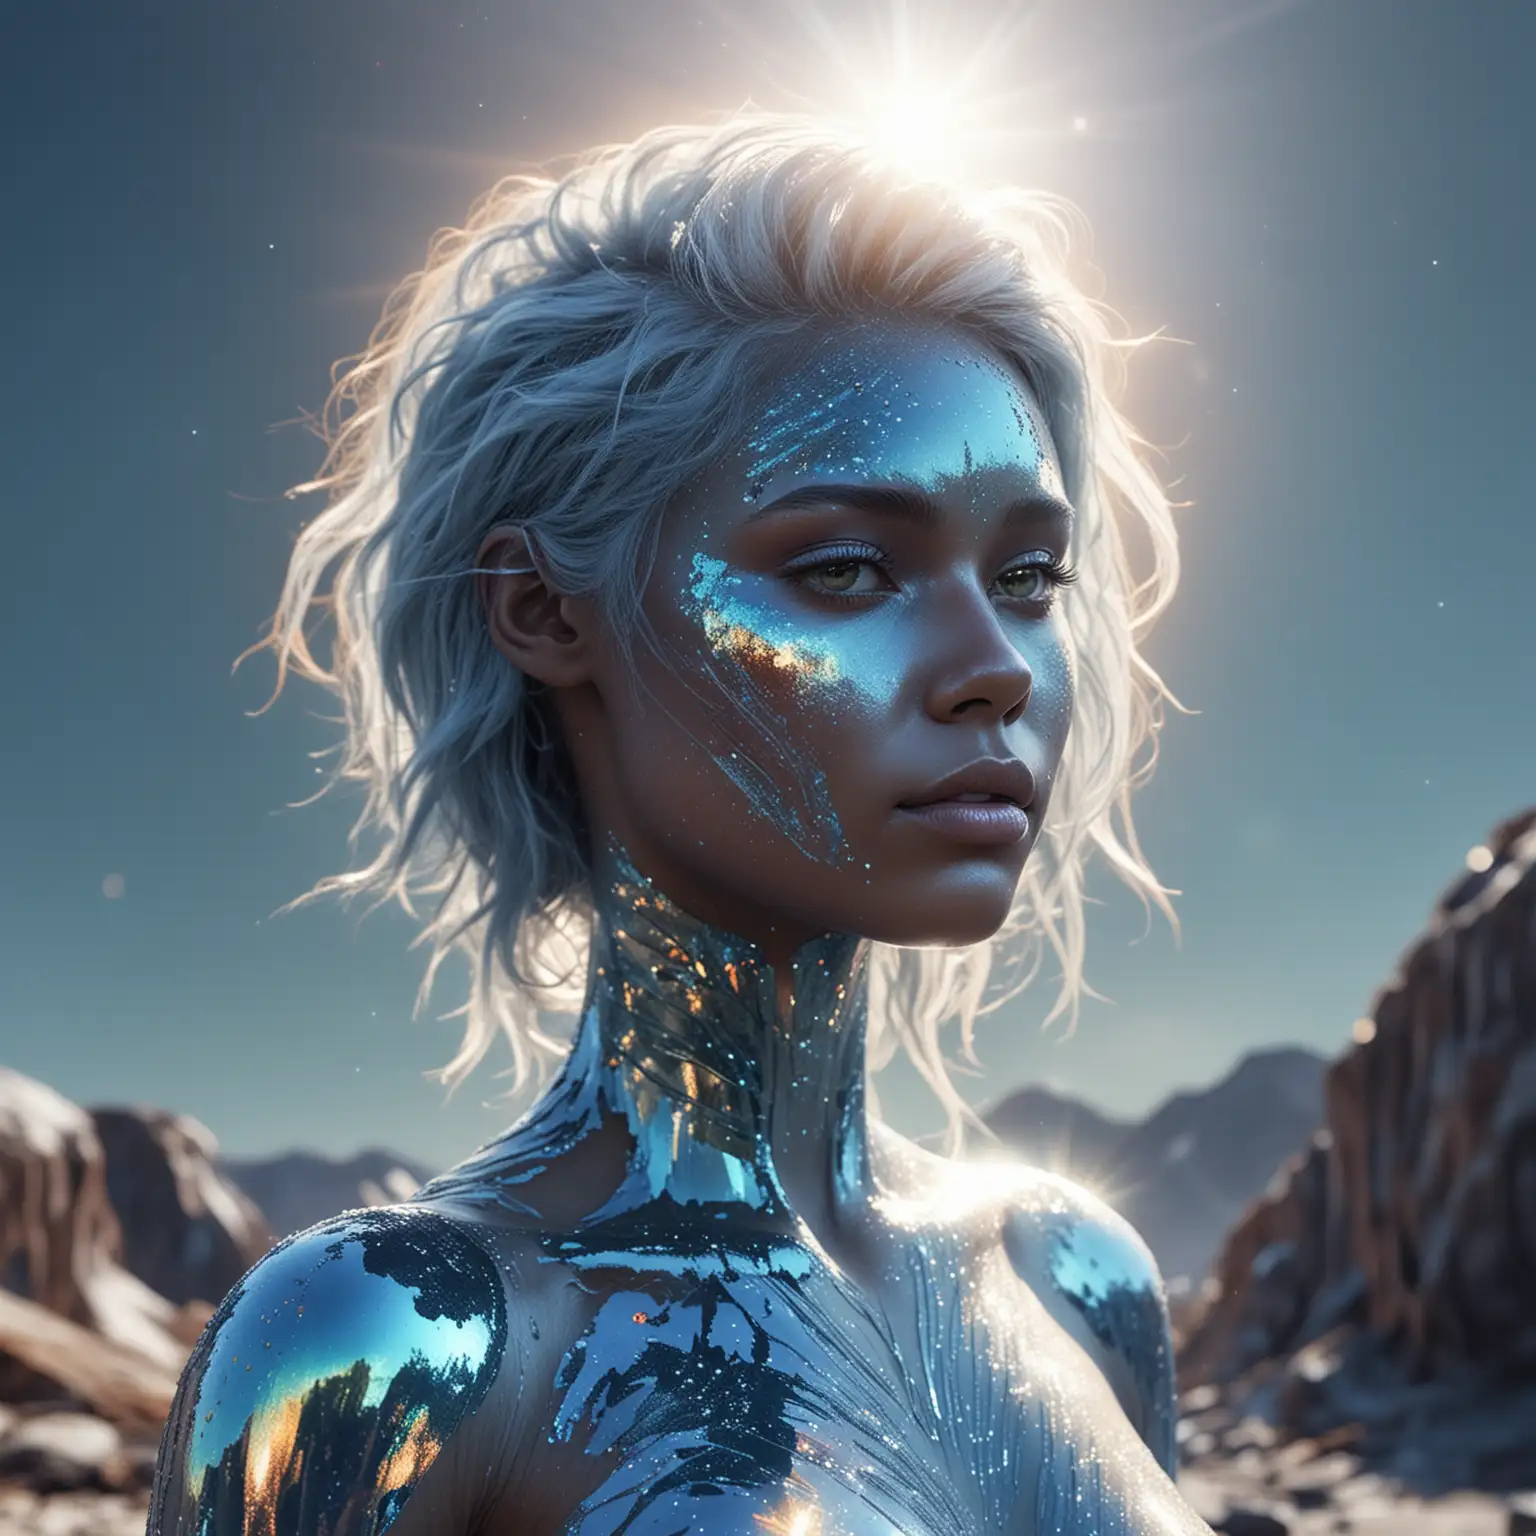 create a blue human with iridescent skin and hair standing on a crystalline celestial planet with a sun shining down on her head